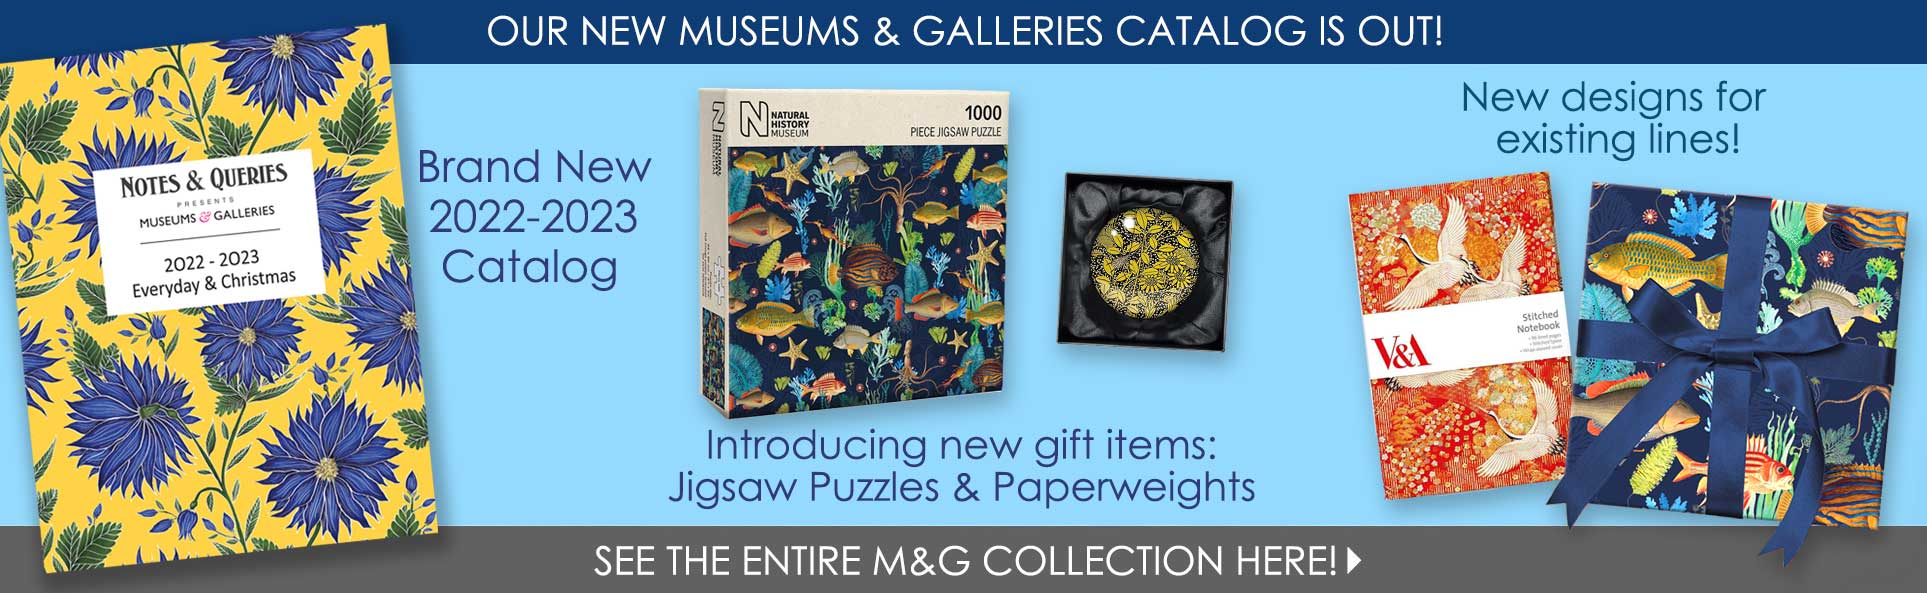 Brand New Museums & Galleries 2022-2023 Catalog